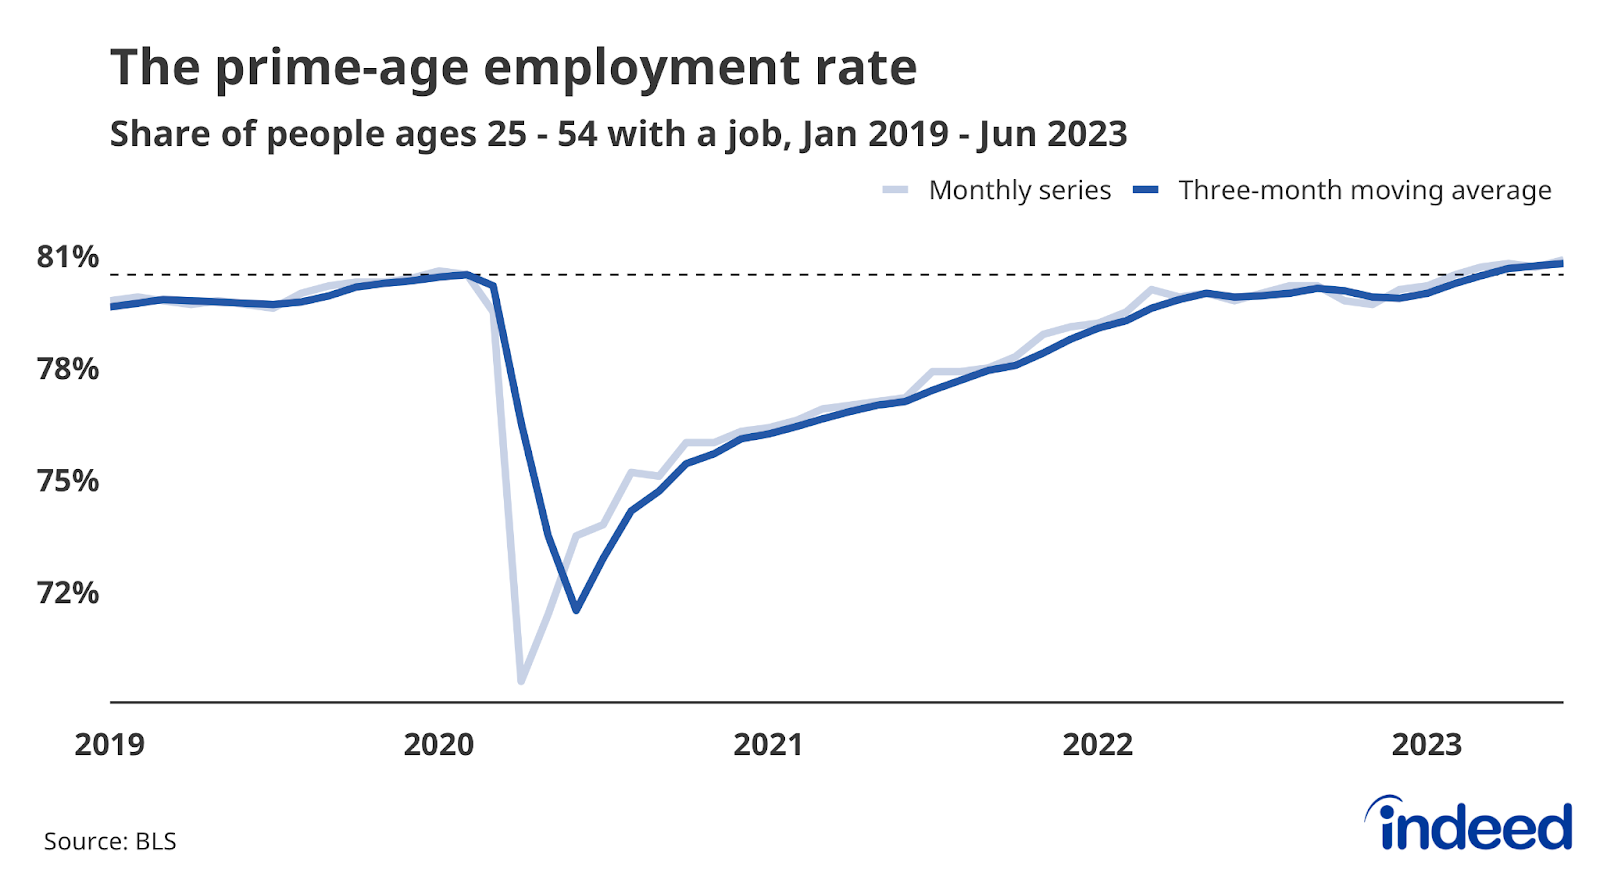 Line graph titled “The prime-age employment rate” with a vertical axis ranging from 72% to 81% tracking the share of the population ages 25-54 with a job. The ratio slowed down in 2022 after quickly rebounding in 2020 and 2021, and is now above its average level in 2019.